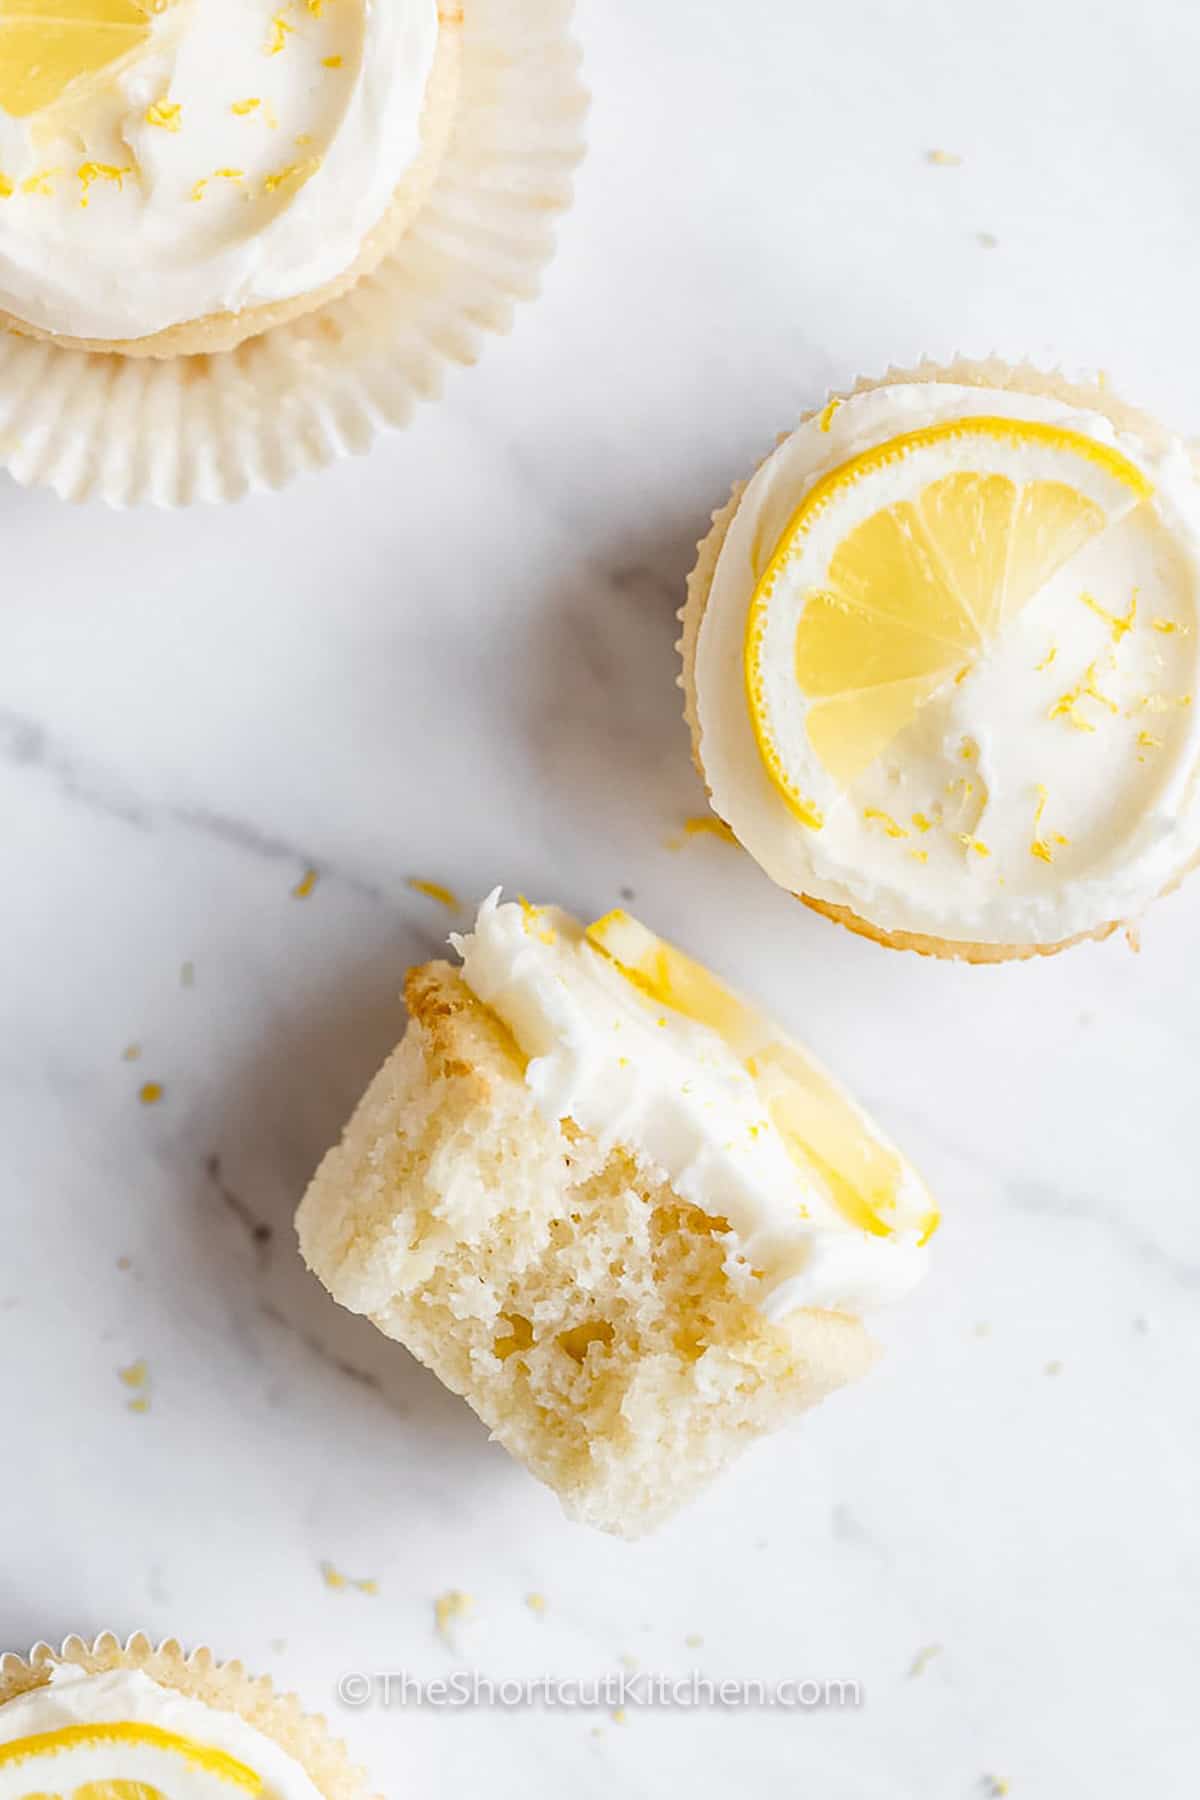 Lemon Cupcakes with a bite taken out of one